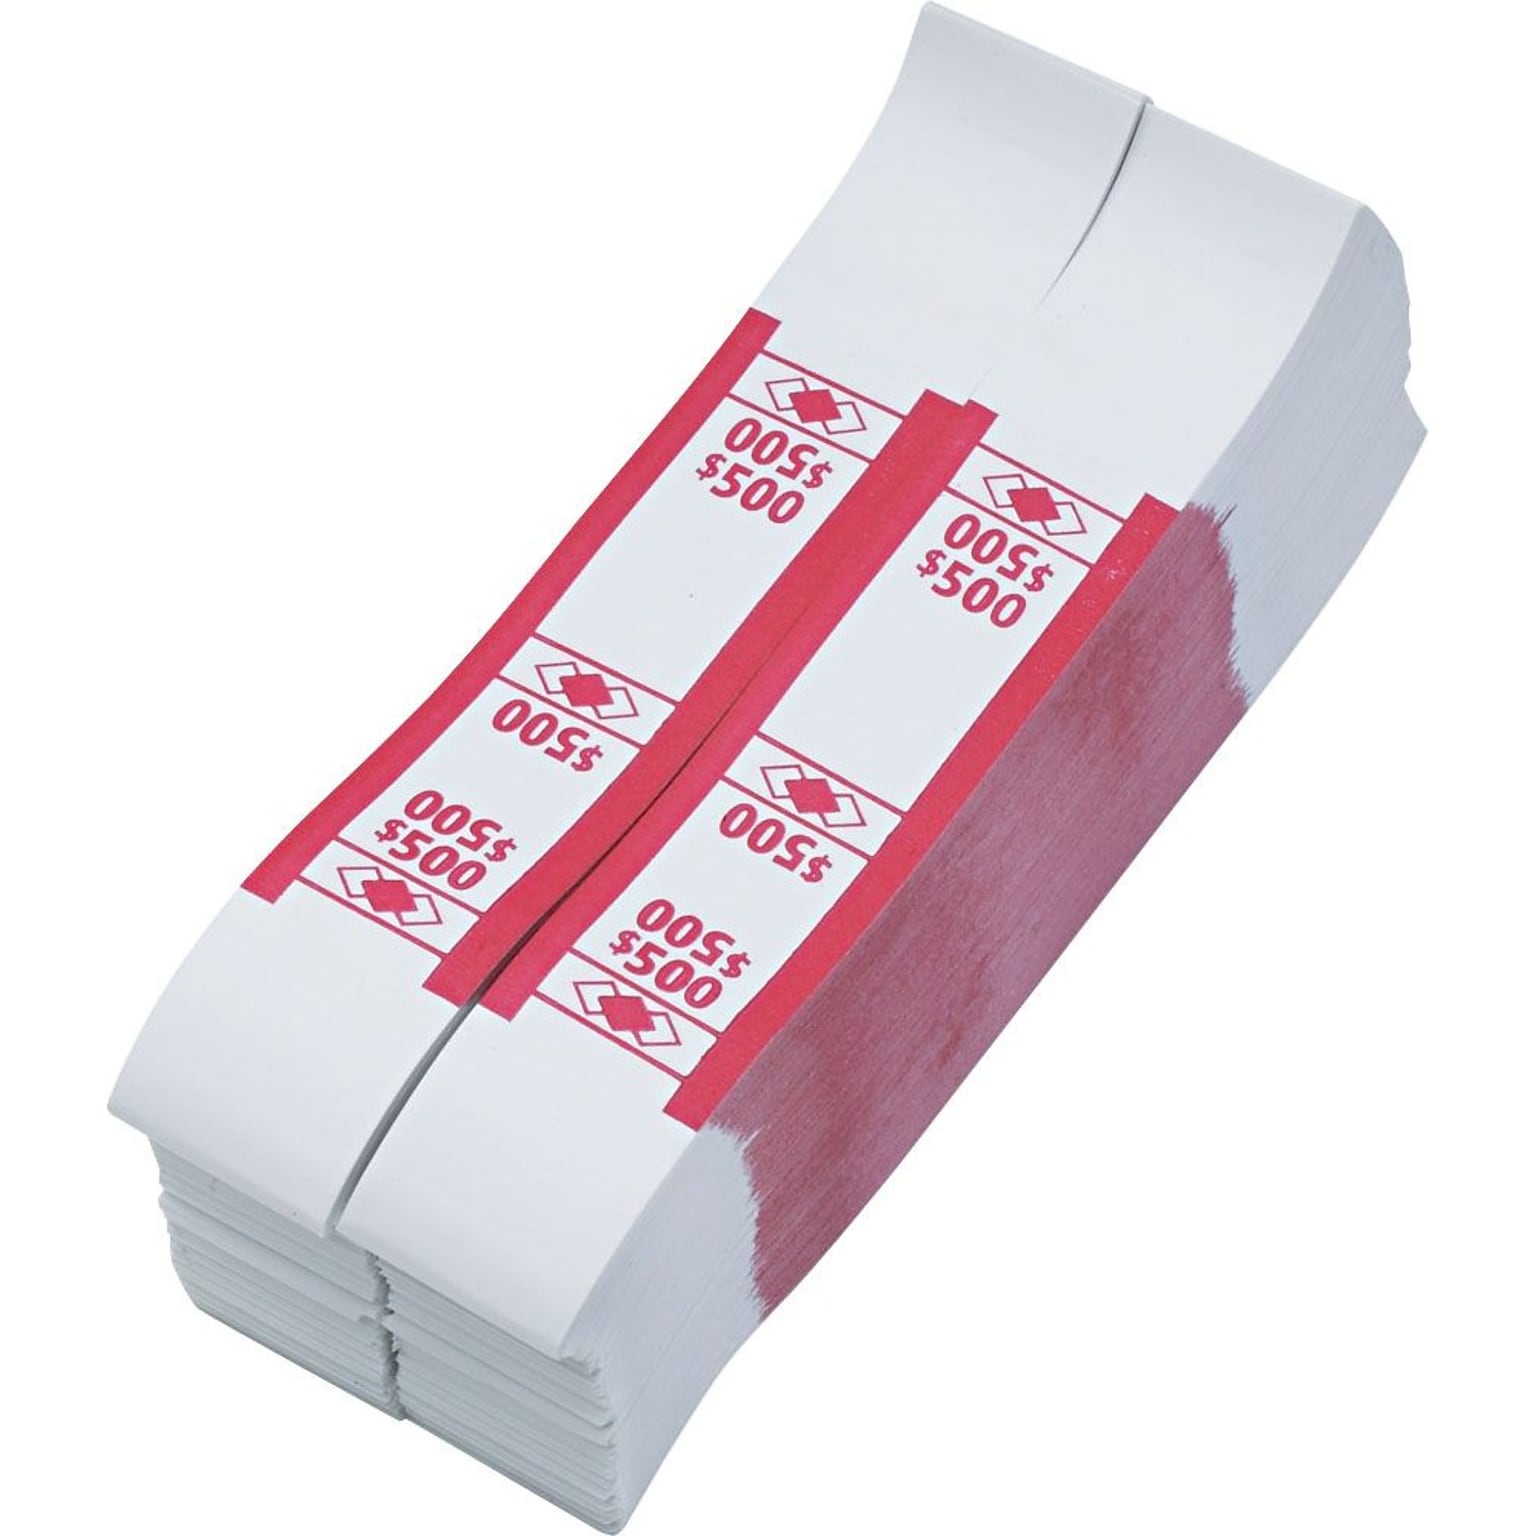 PM Company Self-Stick White Kraft Currency Straps, Color Coded for $500, Red, 1,000/Pack